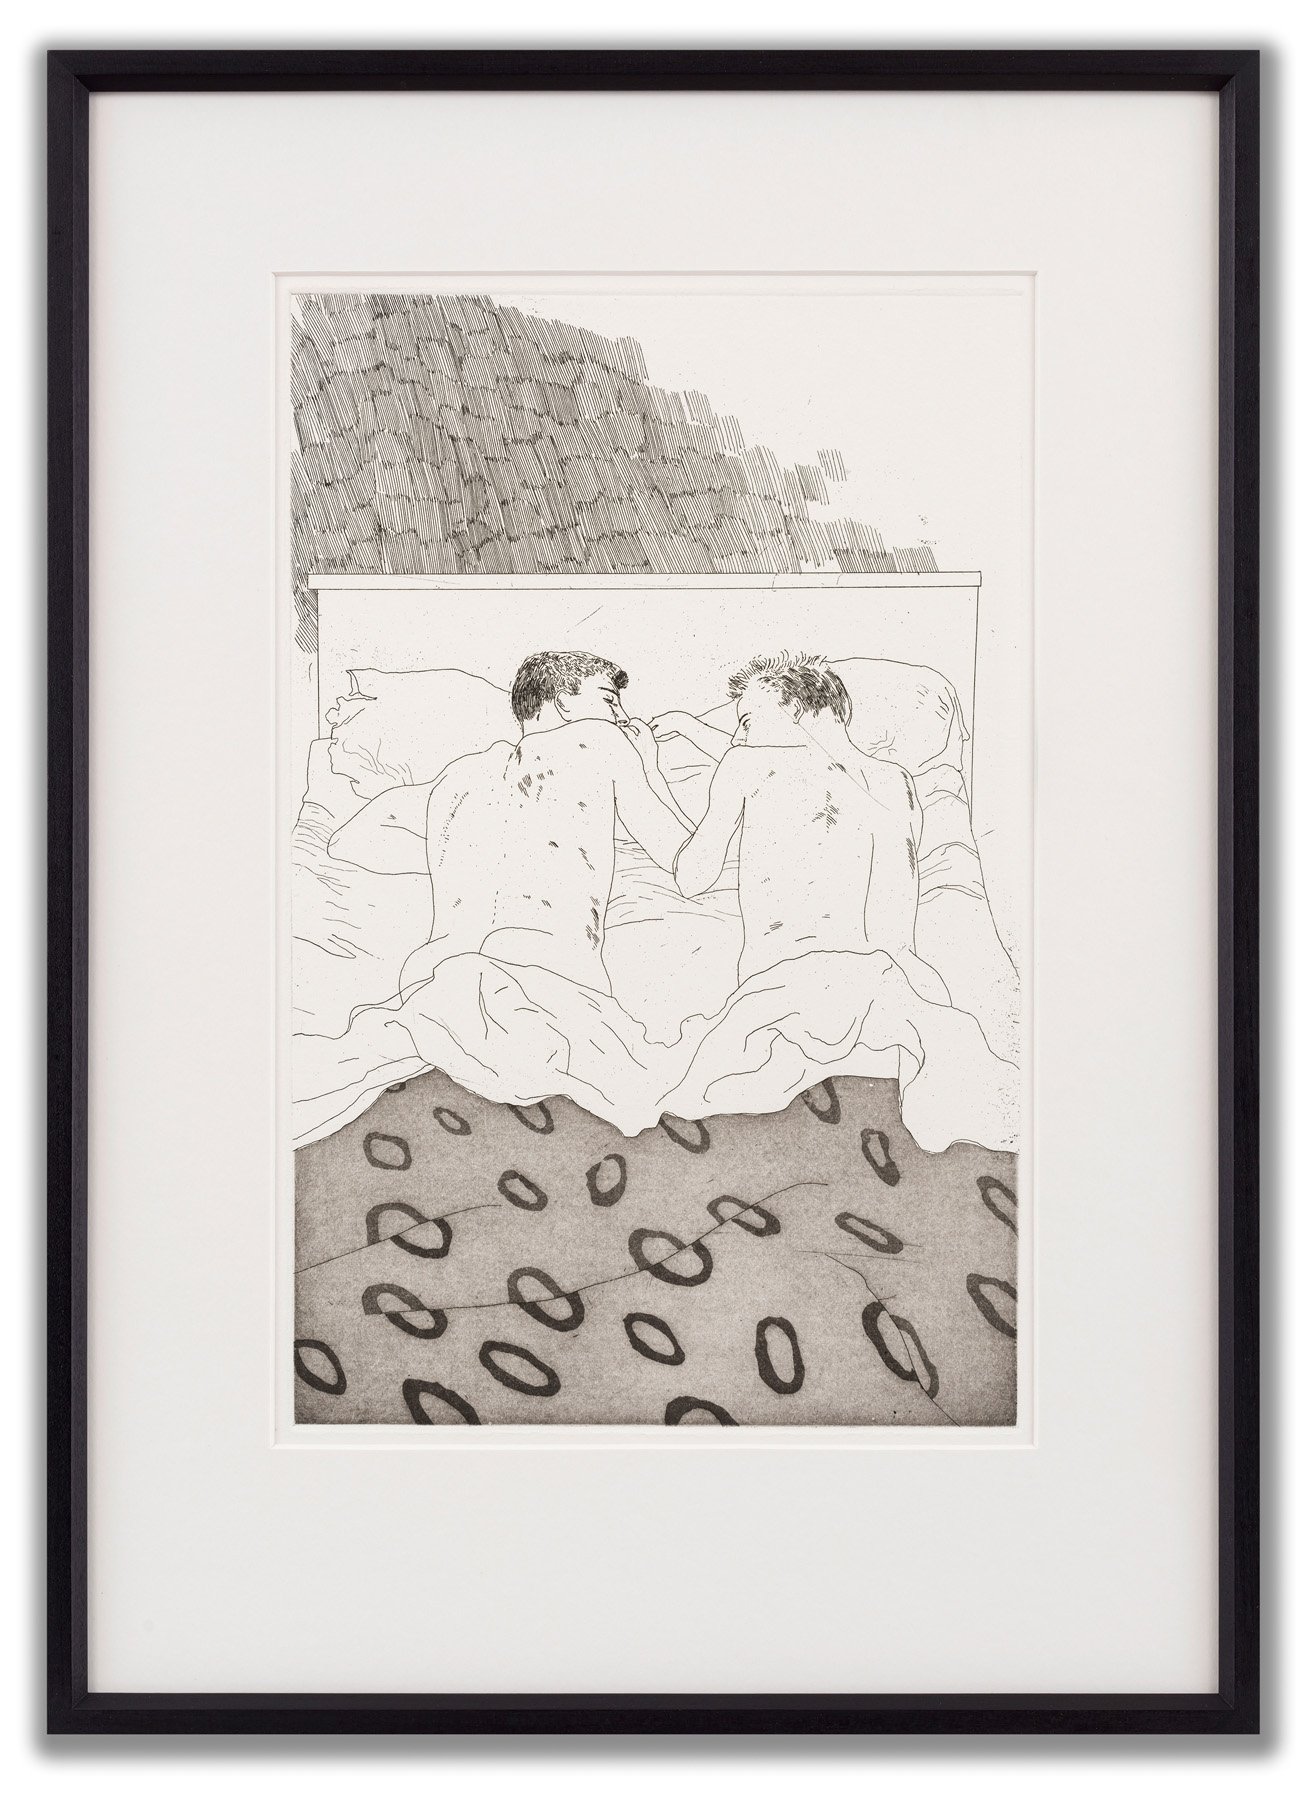 David Hockney, (British b.1937), Two Boys aged 23 or 24 (Illustrations for Fourteen Poems from C.P. Cavafy), 1966